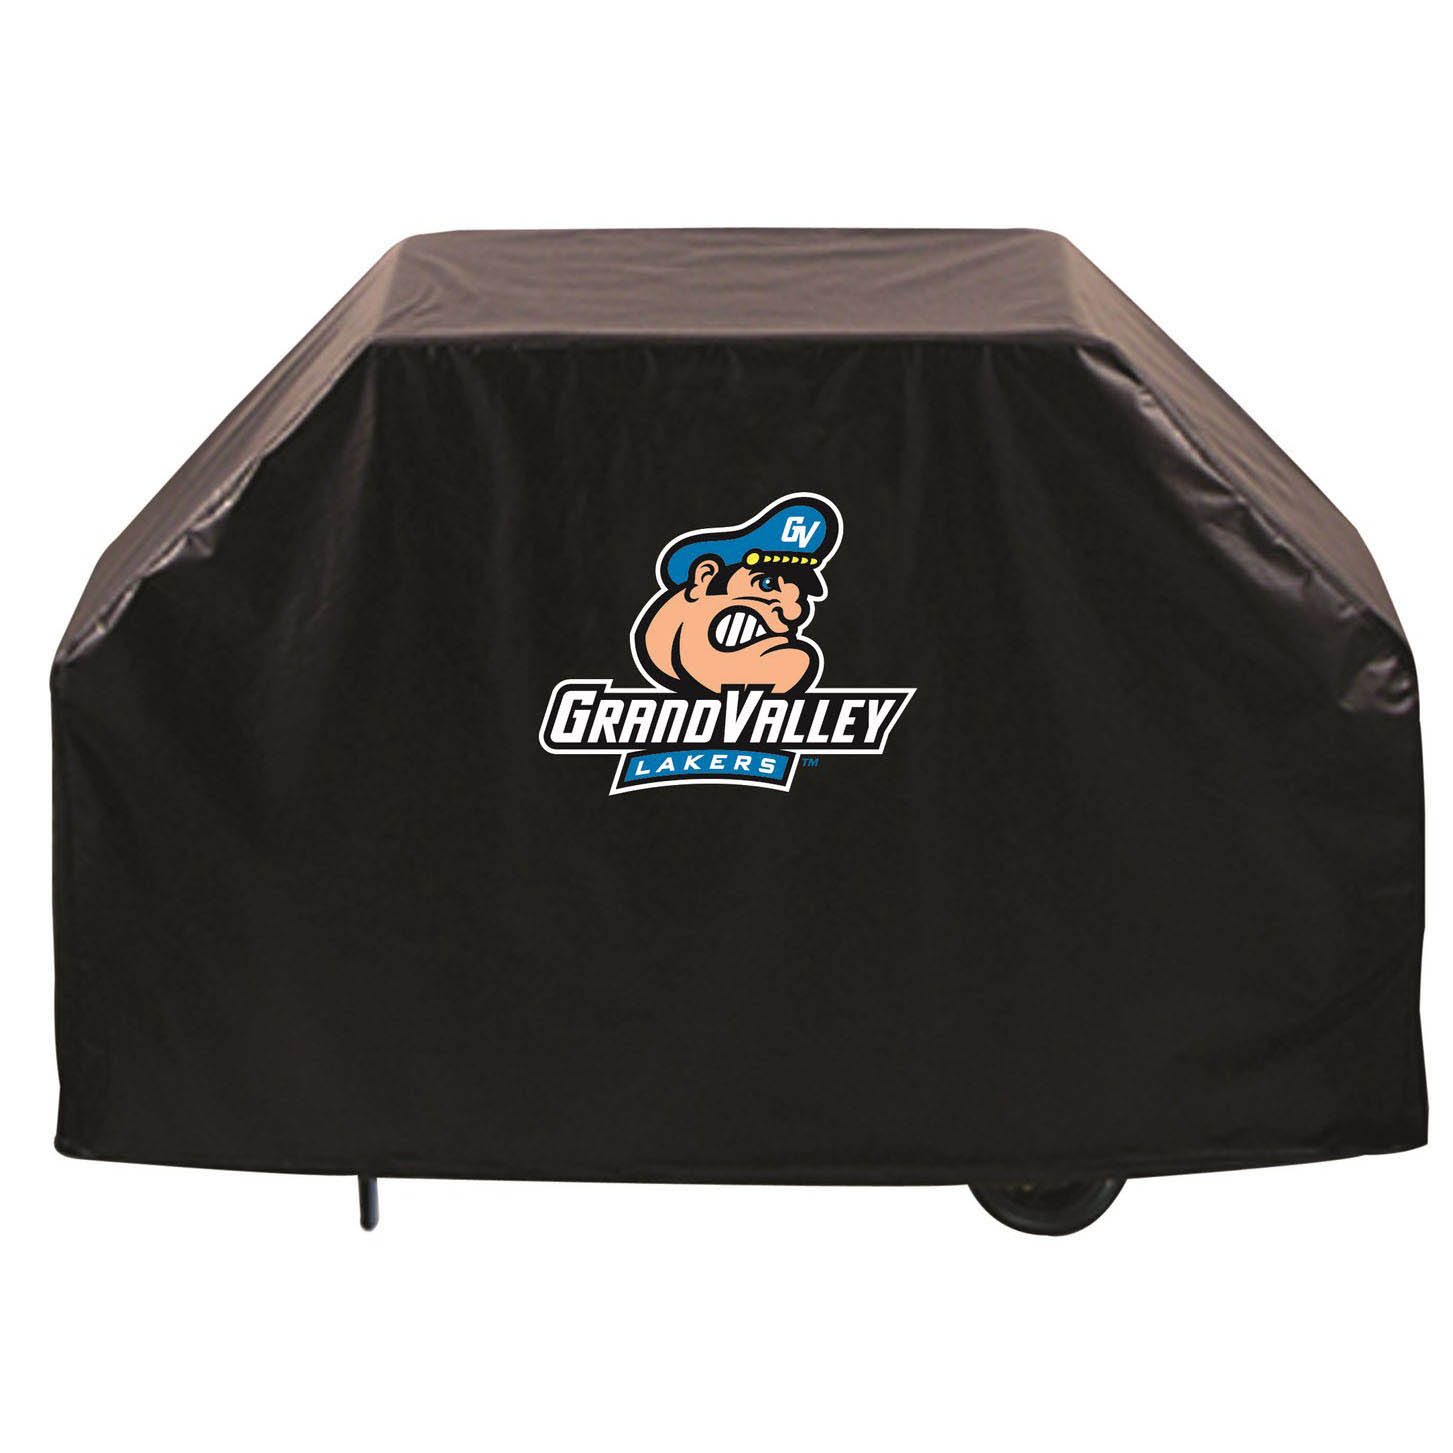 Grand Valley State Grill Cover